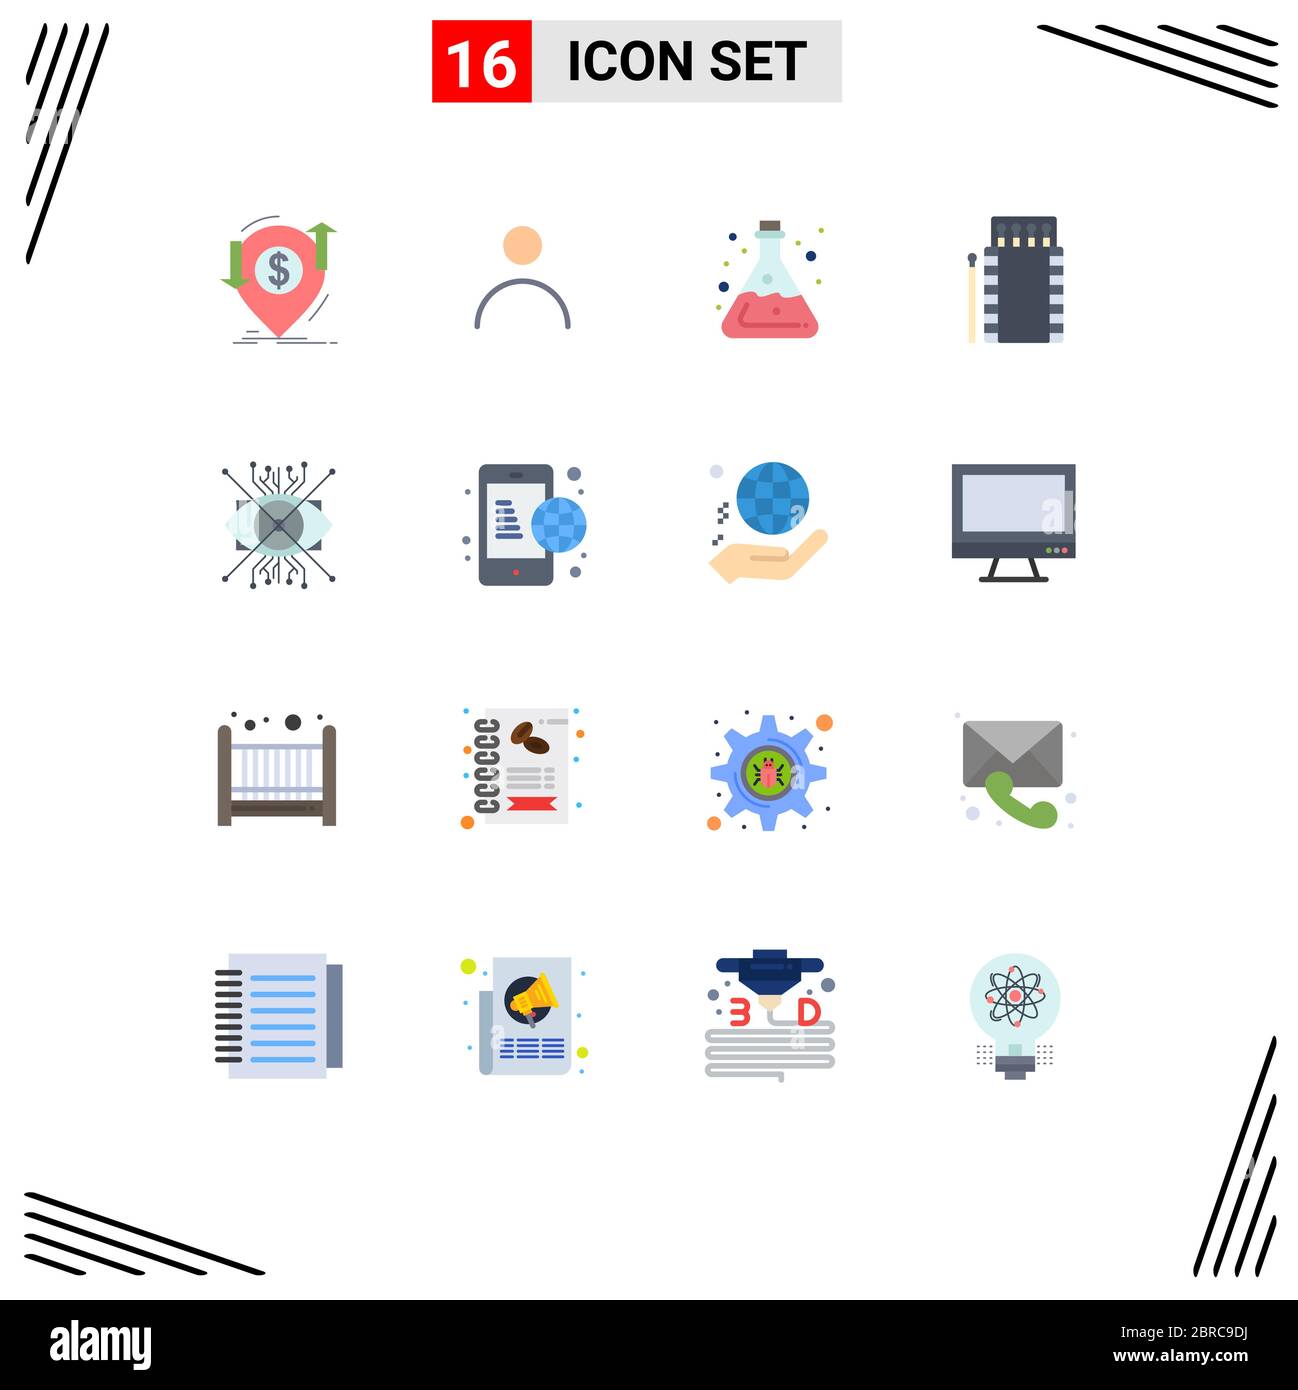 Universal Icon Symbols Group of 16 Modern Flat Colors of bonfire, camping, user, matches, acid Editable Pack of Creative Vector Design Elements Stock Vector